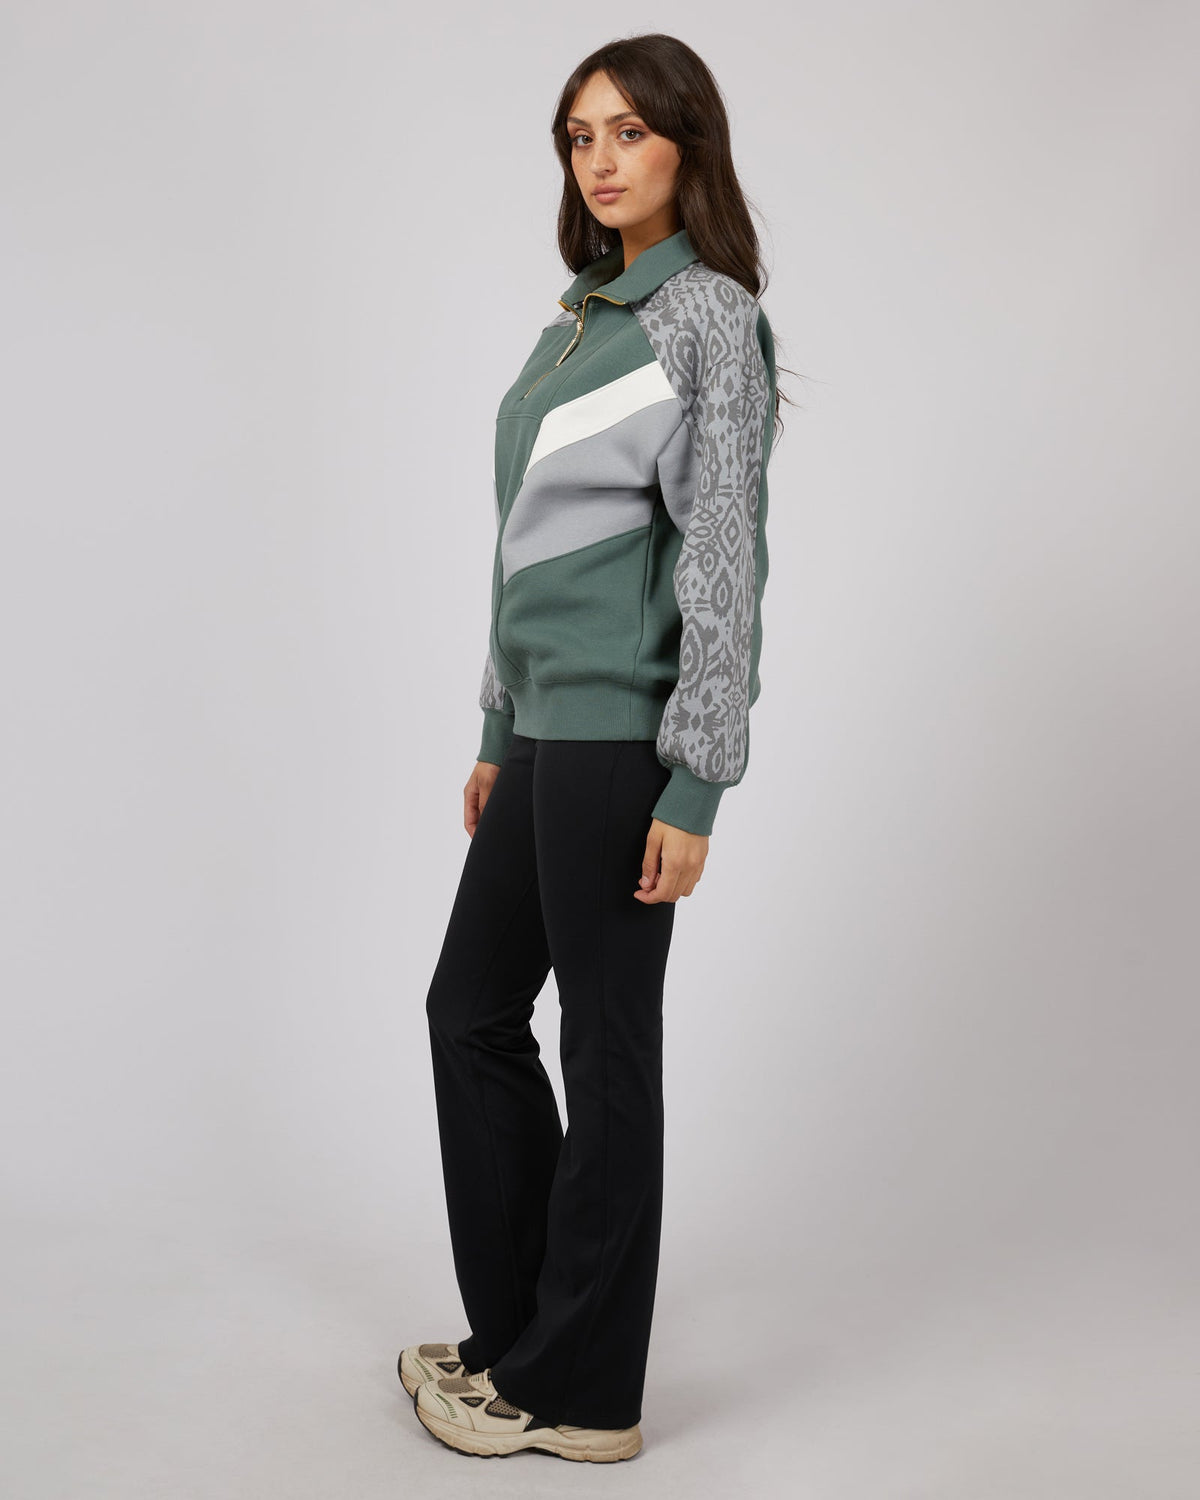 All About Eve-National Quarter Zip Green-Edge Clothing